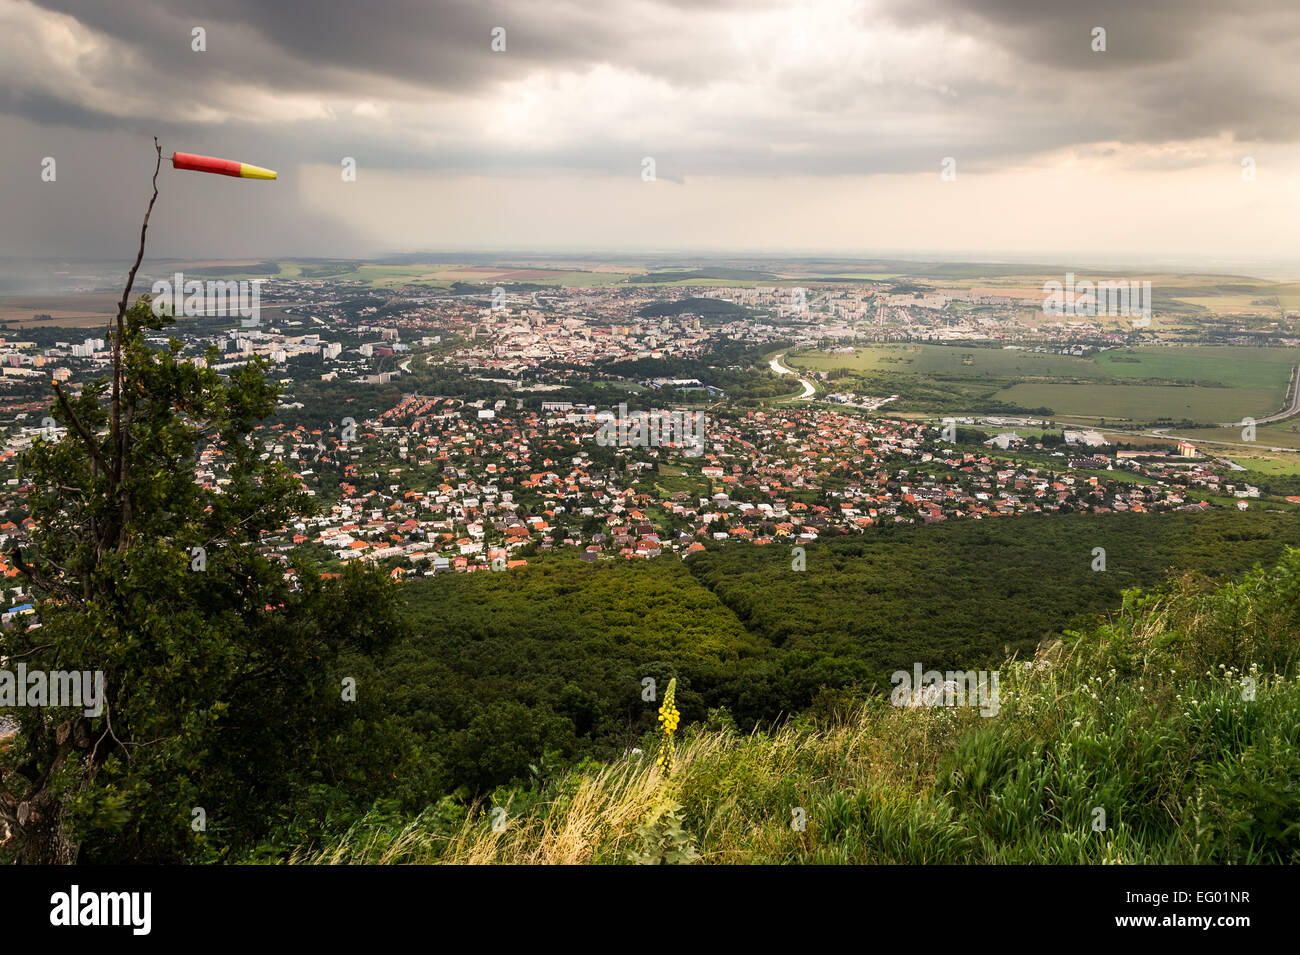 Heavy Clouds Rain over the City of Nitra as Seen from Hill Stock Photo